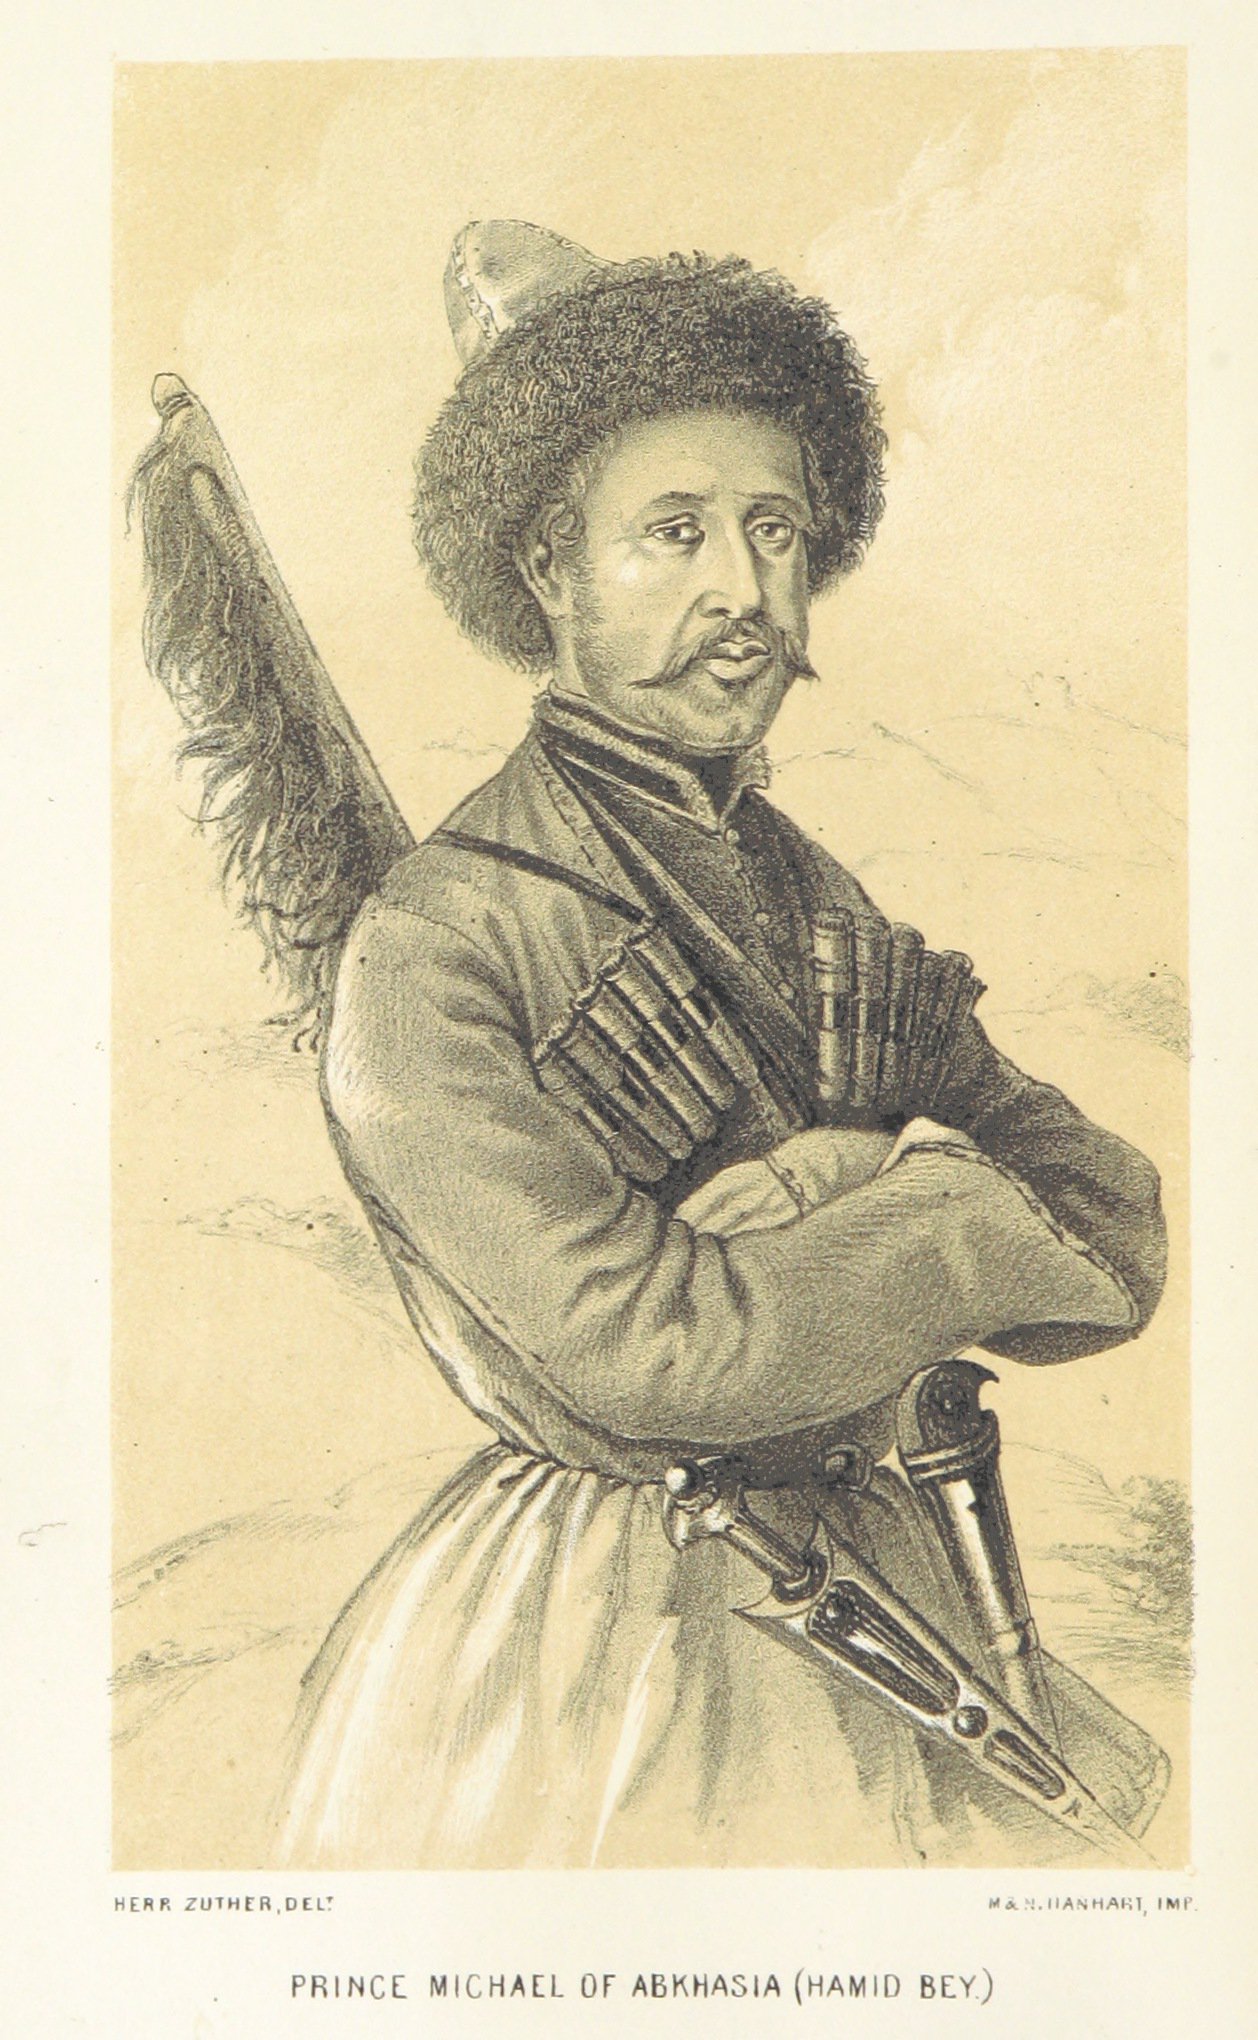 "Prince Michael of Abkhasia (Hamid Bey)" - taken page 90 of 'The Trans-Caucasian Campaign of the Turkish Army under Omer Pasha. A personal narrative' by Laurence Oliphant (Edinburgh,1856)